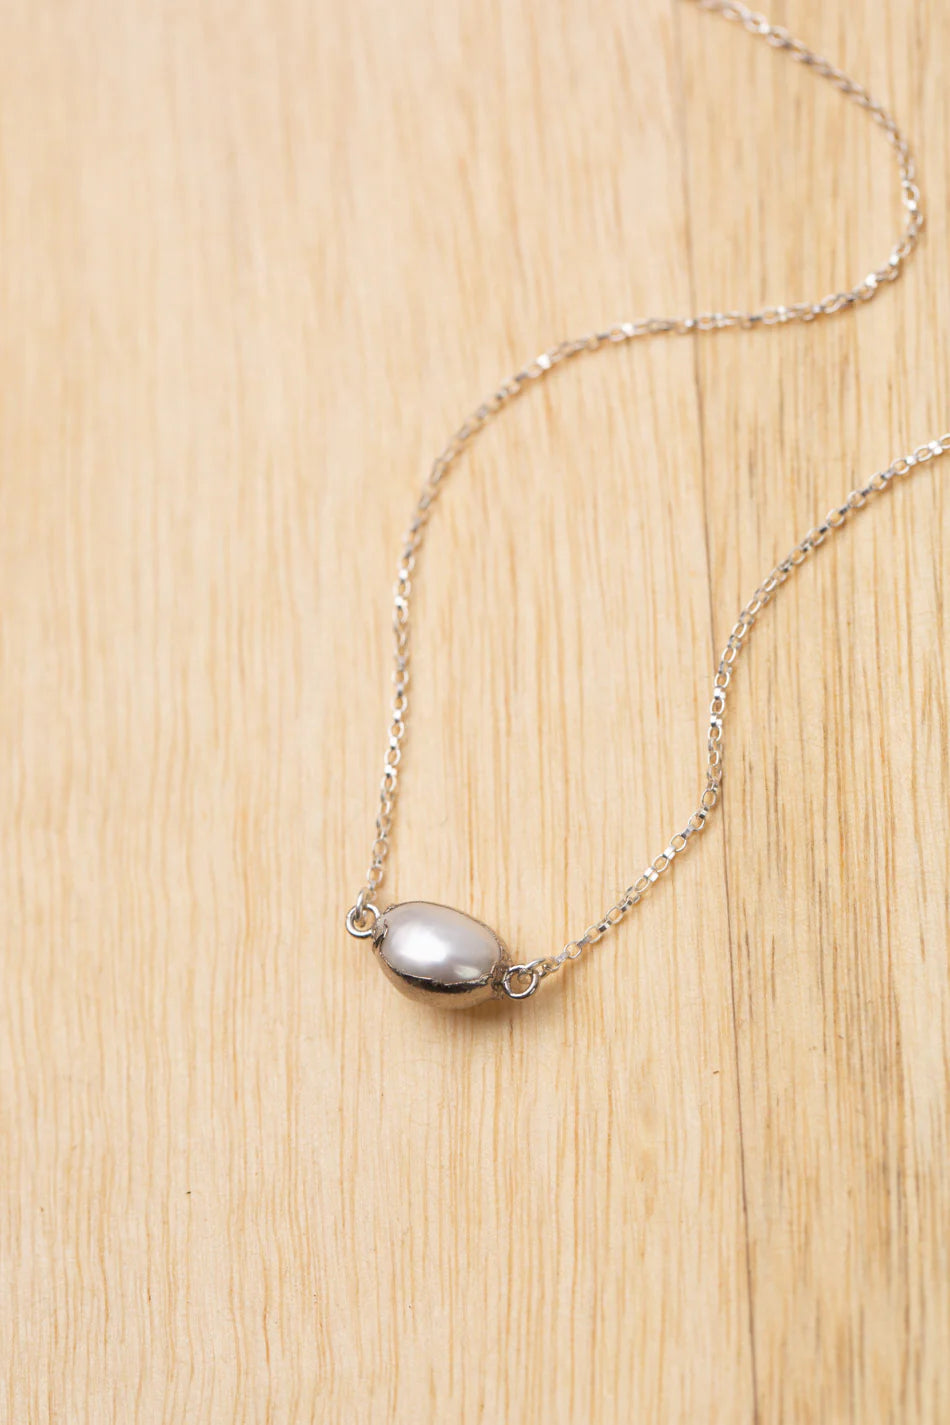 Vaughan - Embrace Collection - Necklace - Pearl Simple #Emb007N